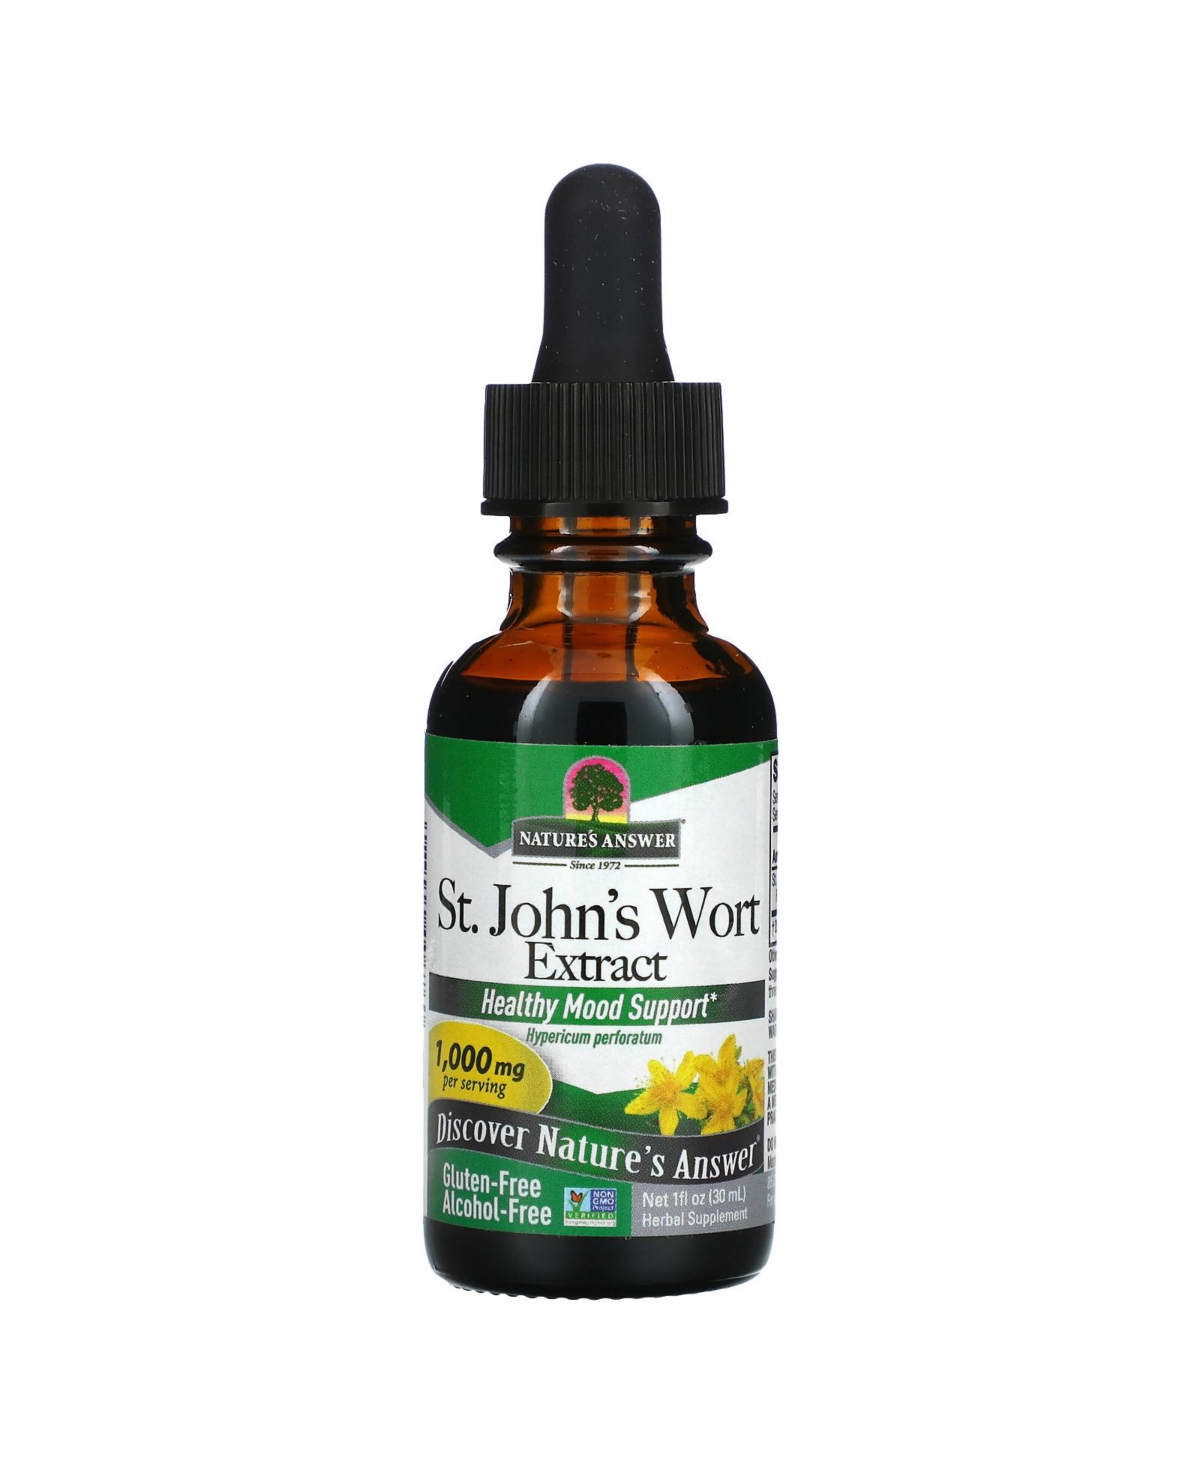 St. John's Wort Extract Alcohol-Free 1 000 mg - 1 fl oz (30 ml) - Assorted Pre-pack (See Table